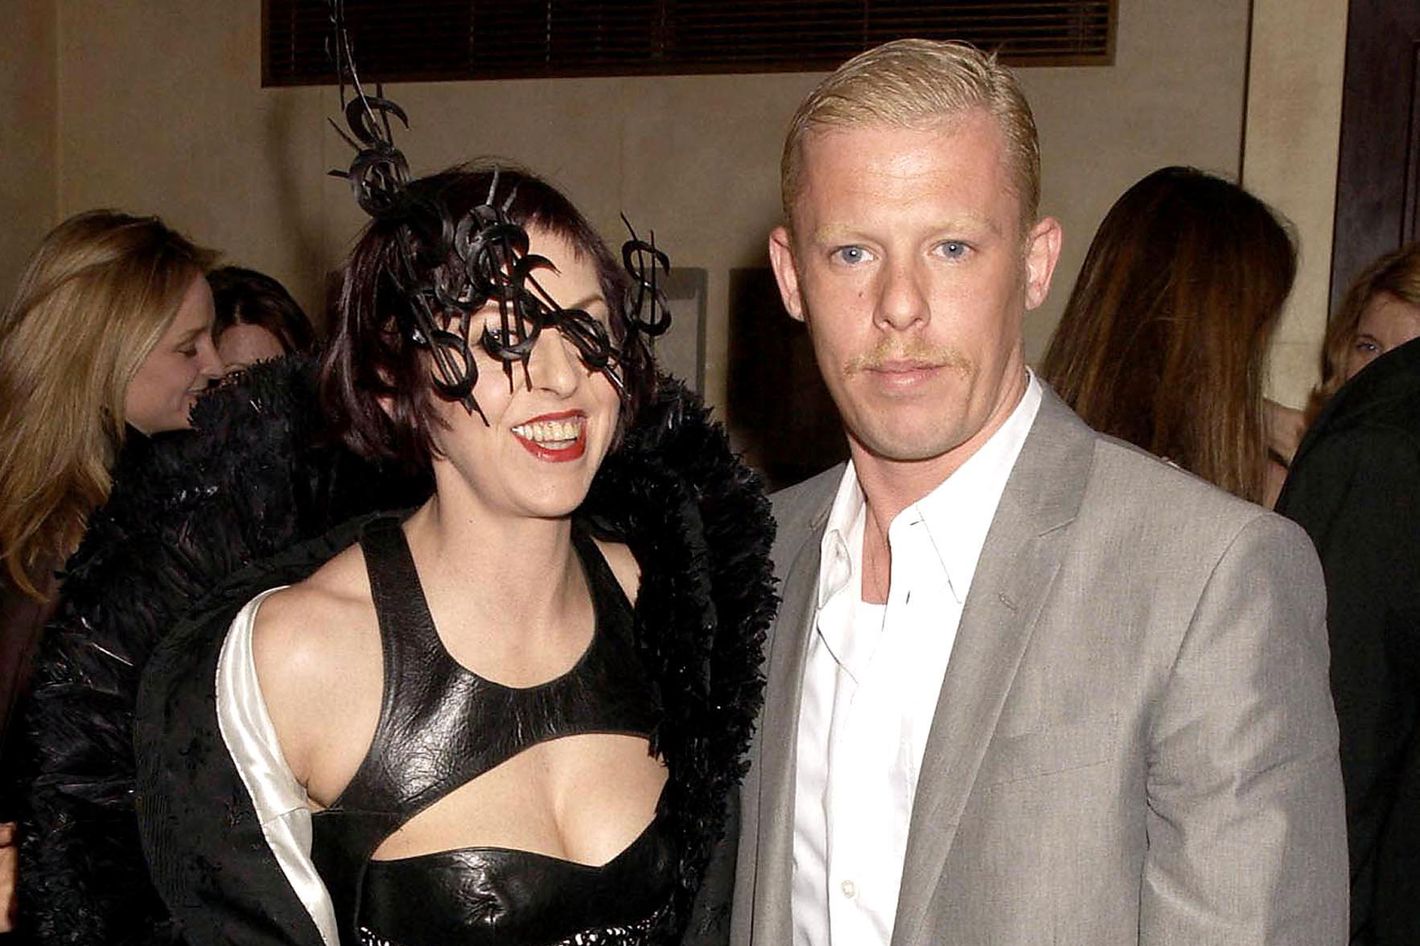 Upcoming Movie The Ripper Explores McQueen and His Muse